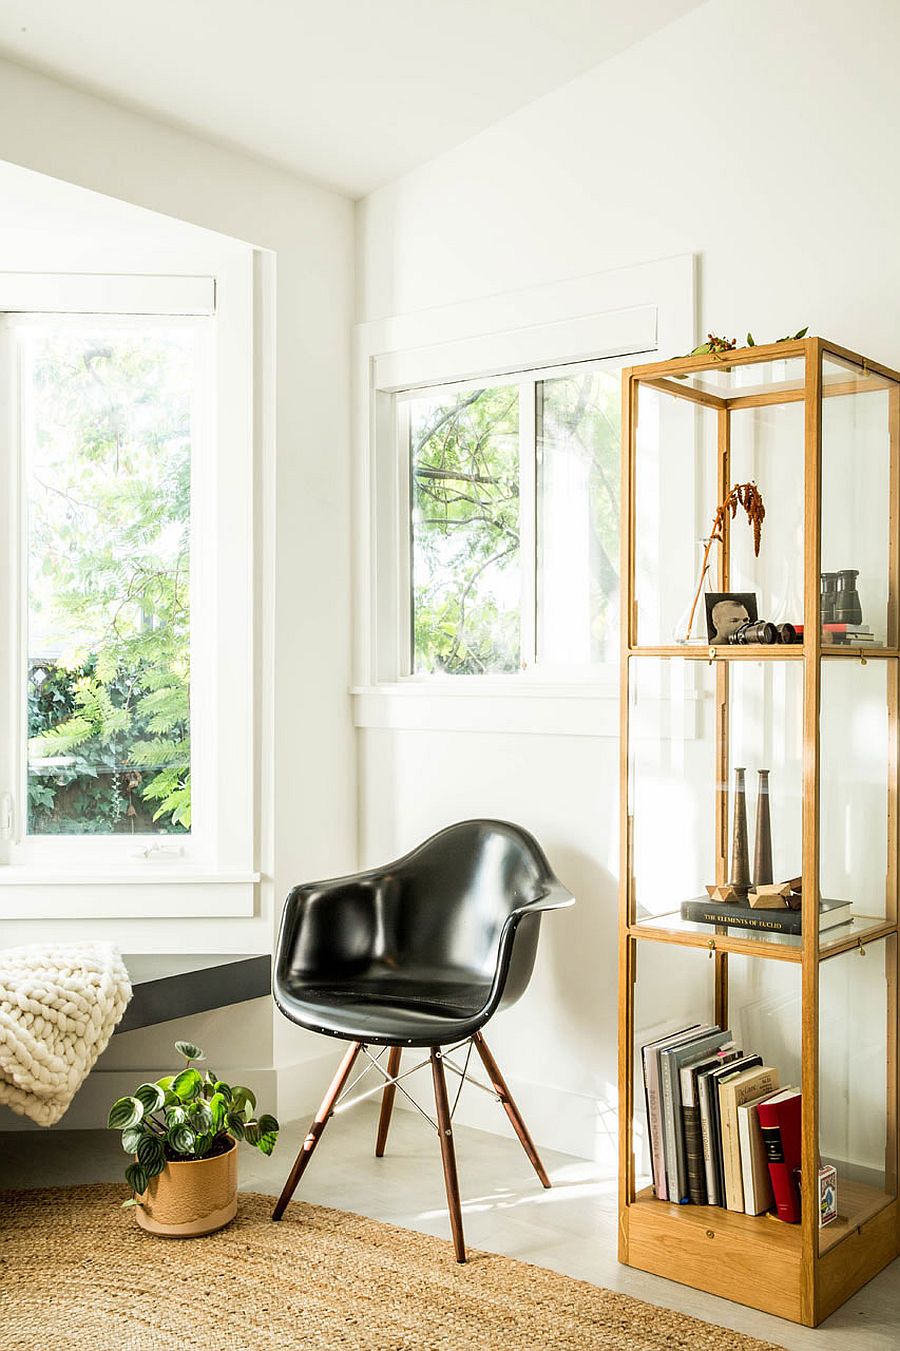 Classic Eames moulded chair and glass bookshelf